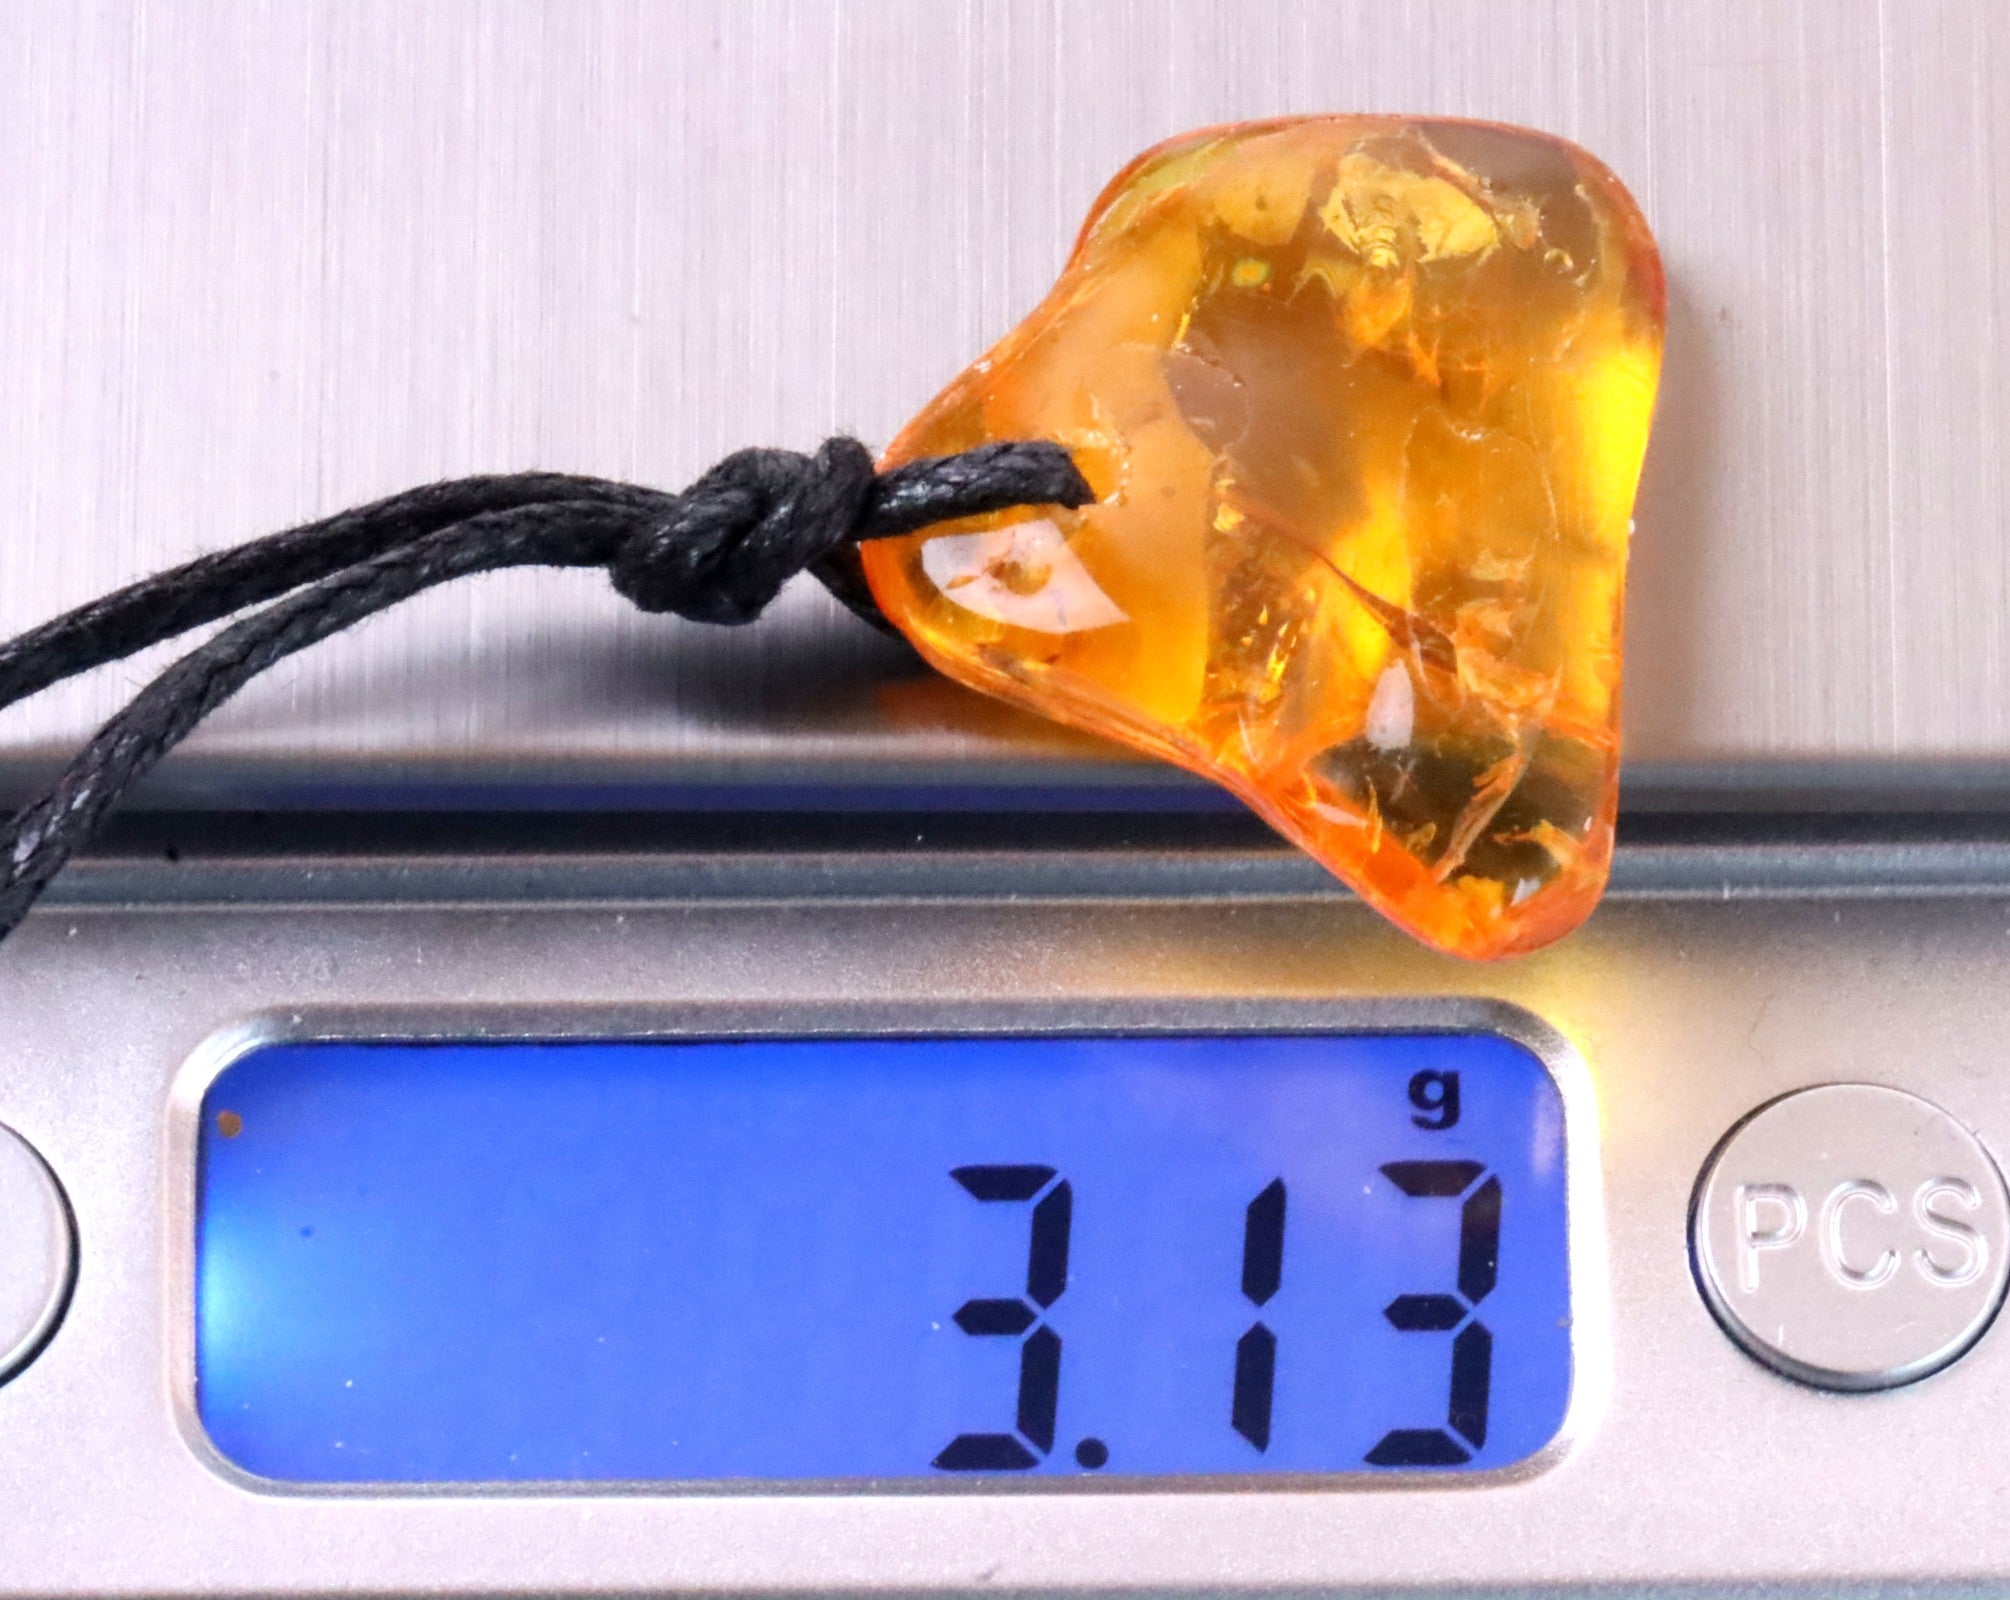 Baltic Amber Amulet 3 X 40 million year old Insect Inclusions in this Amulet